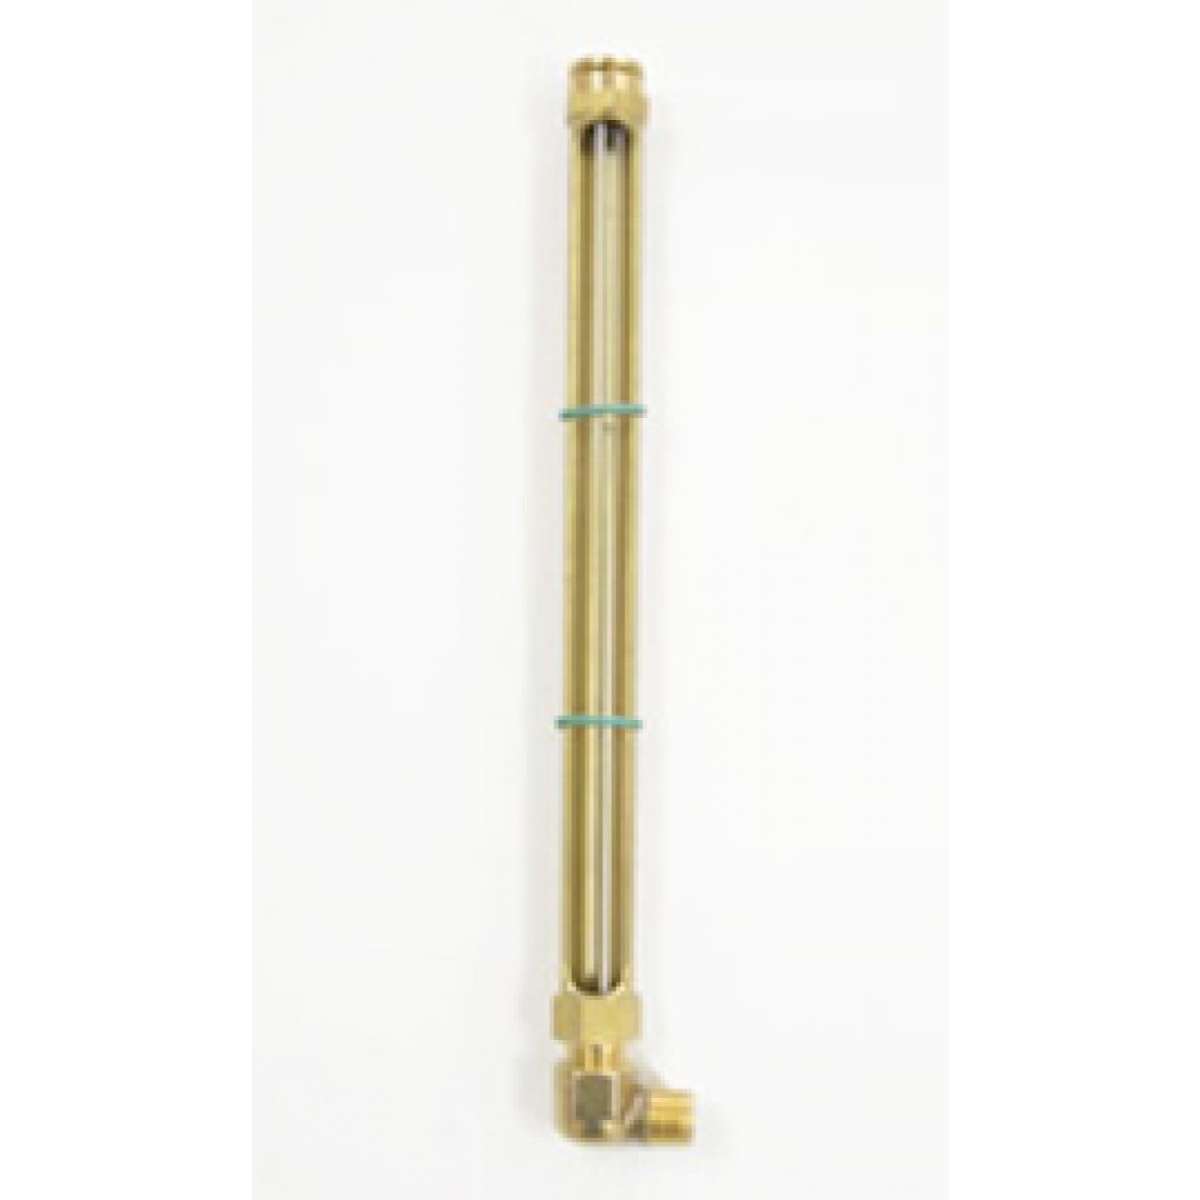 6" level gauge with Elbow Adapter